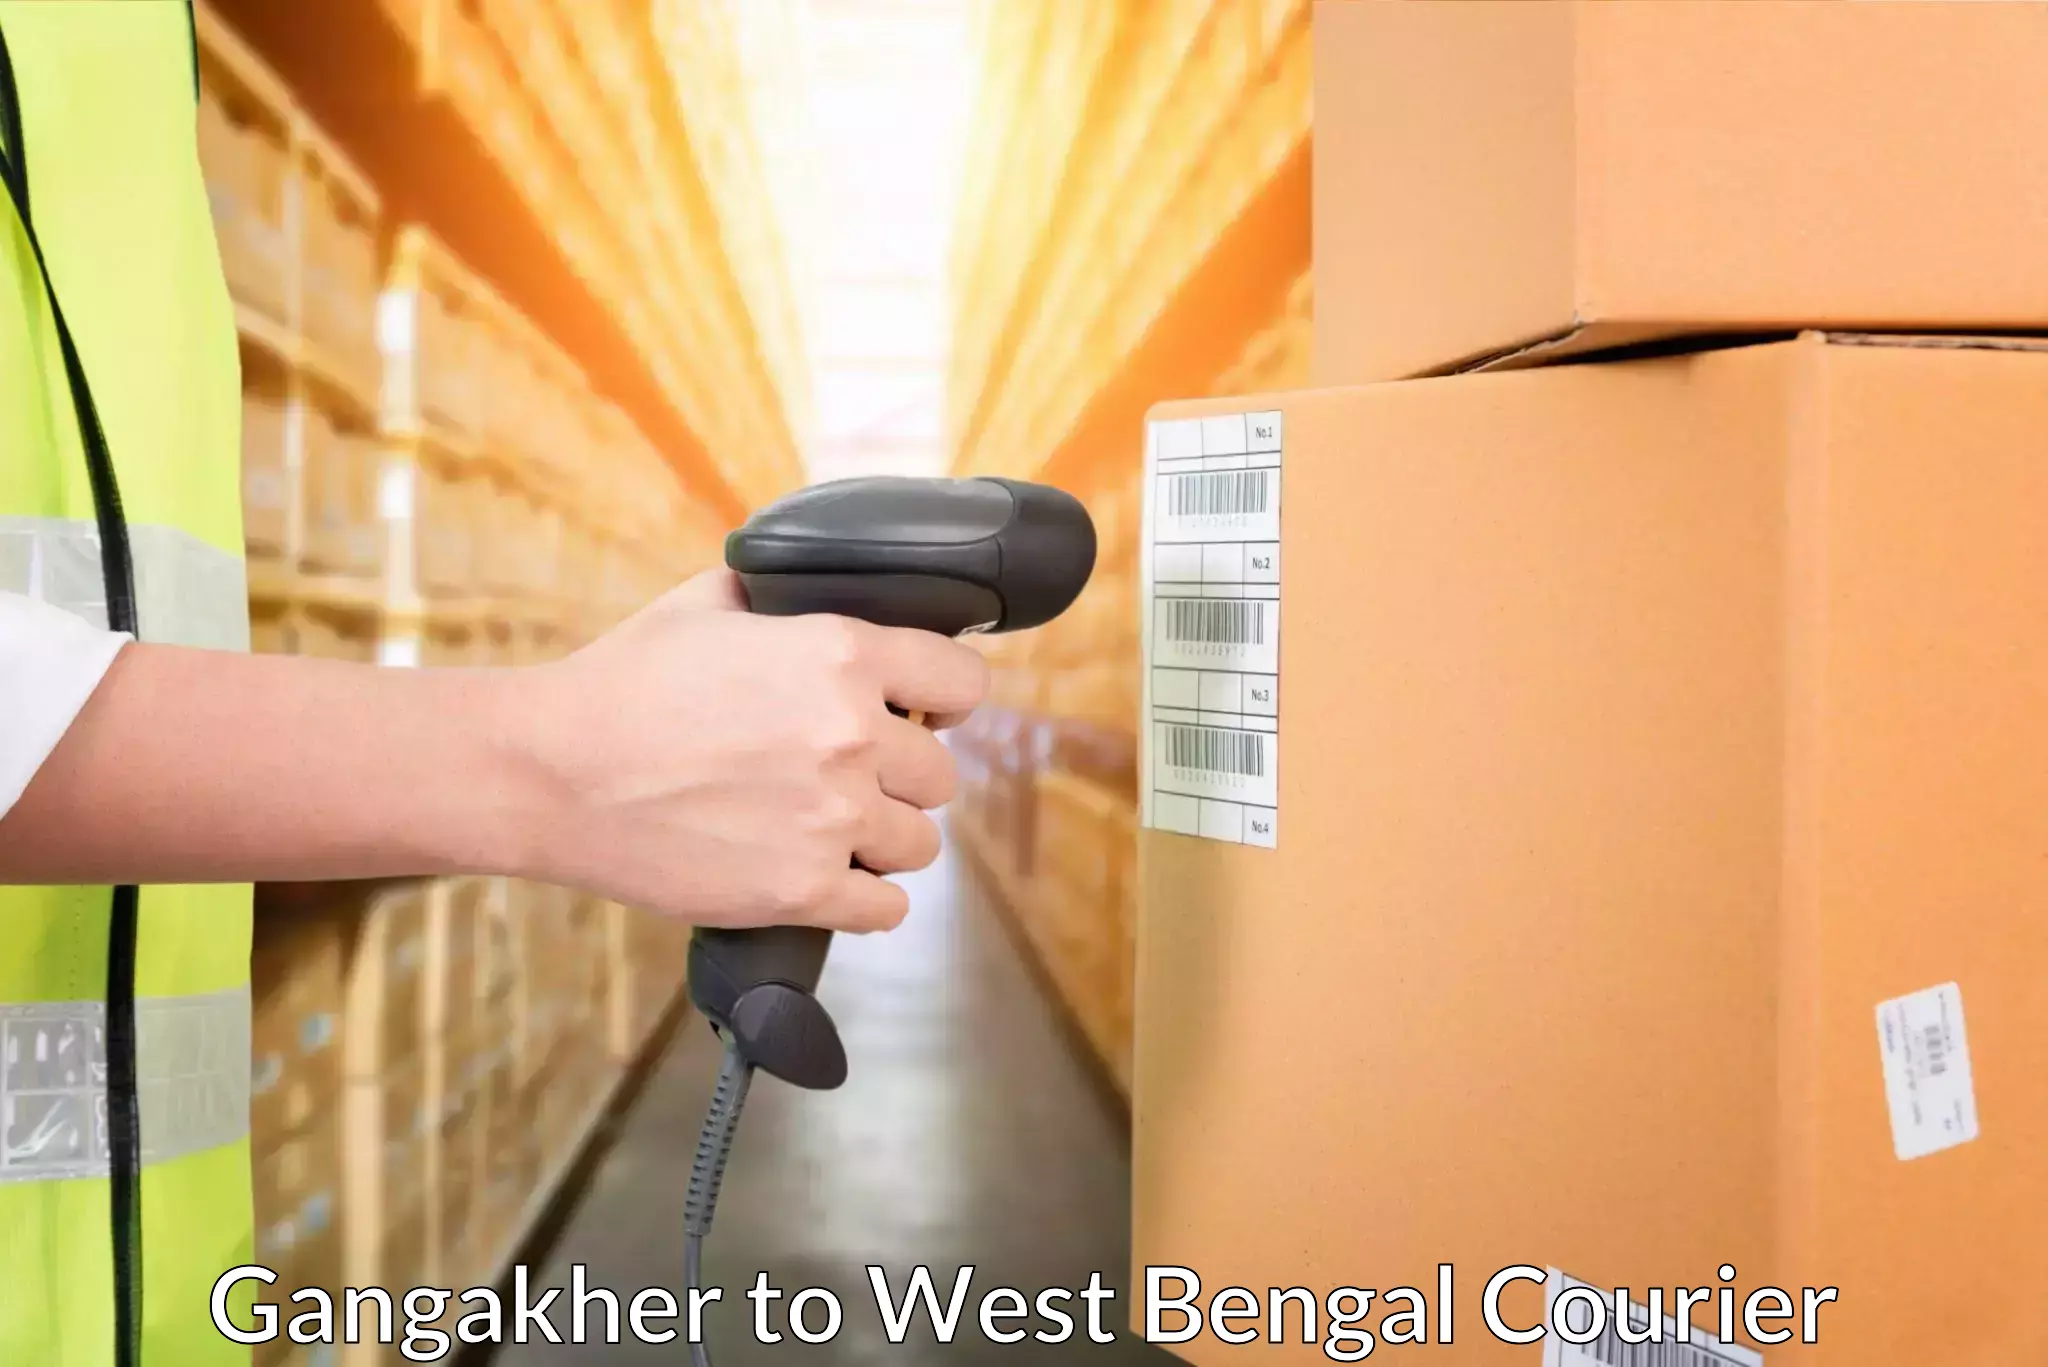 Courier service booking in Gangakher to West Bengal